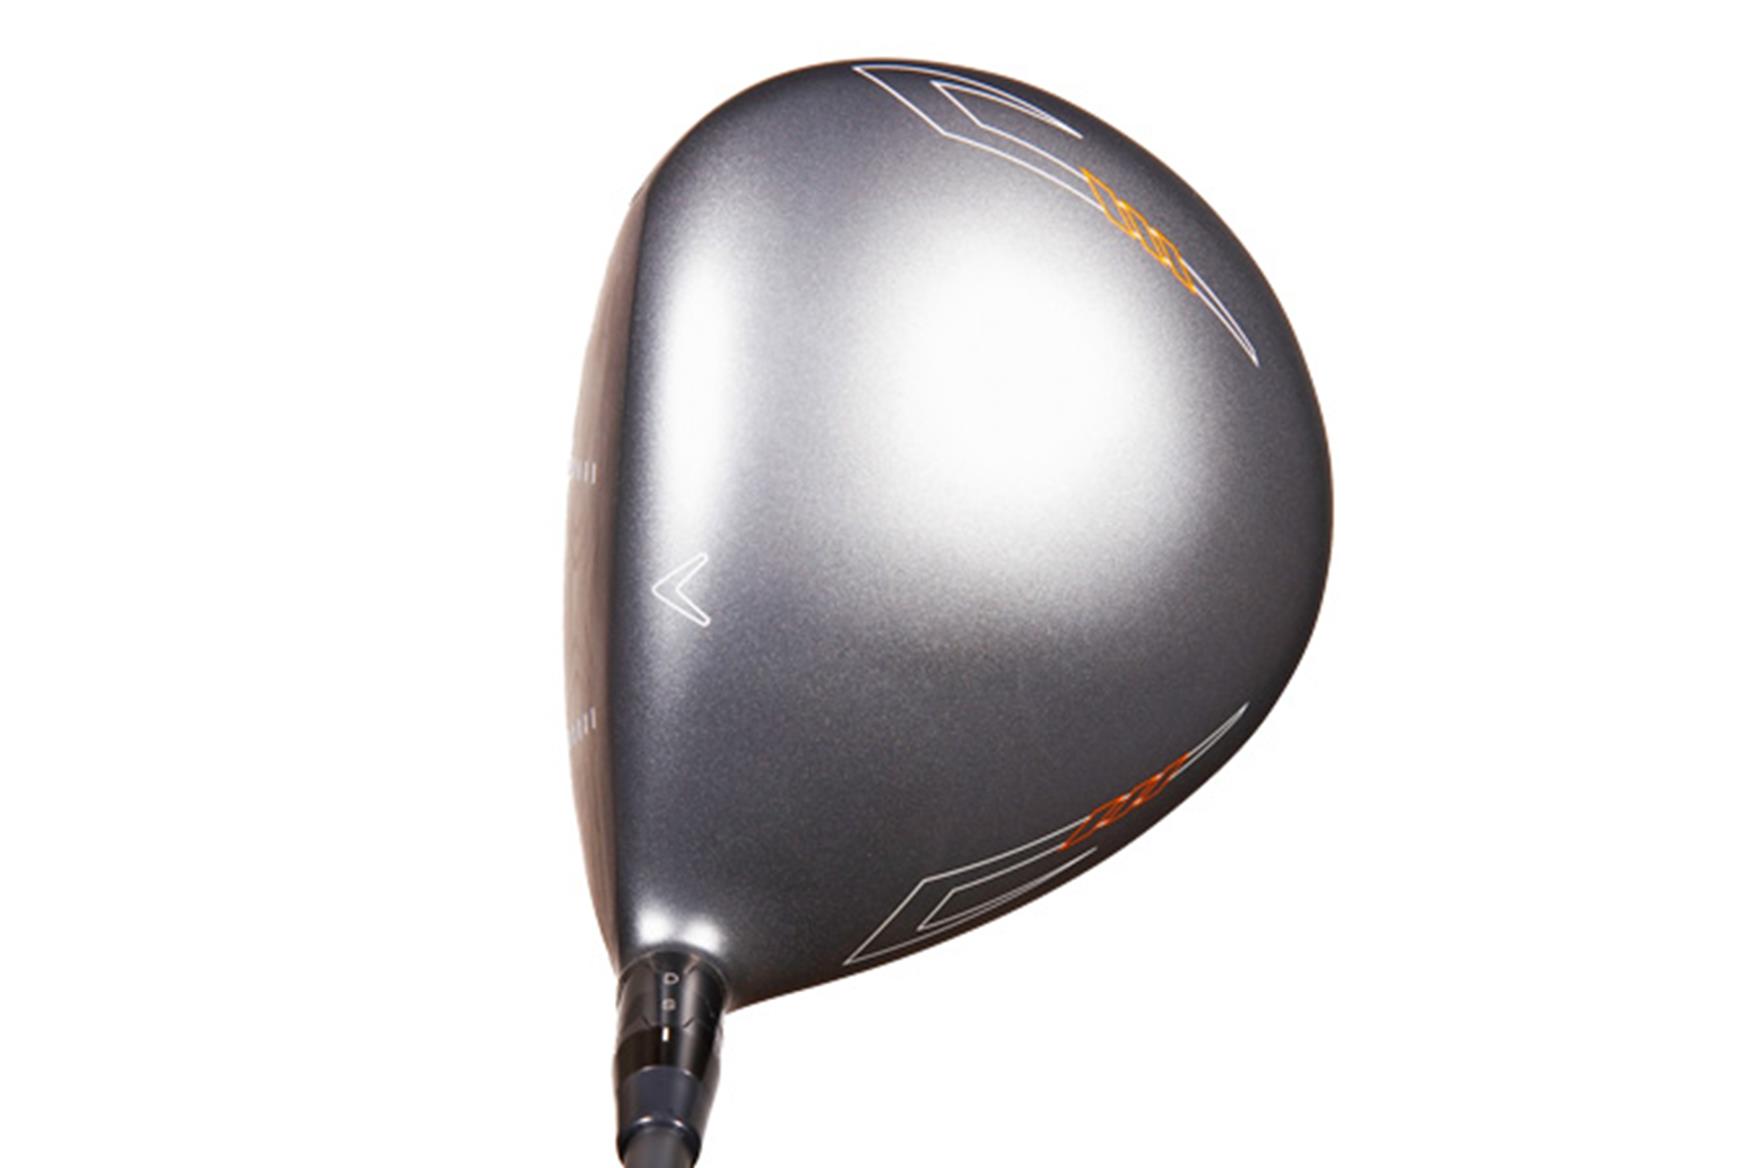 review of callaway x hot driver